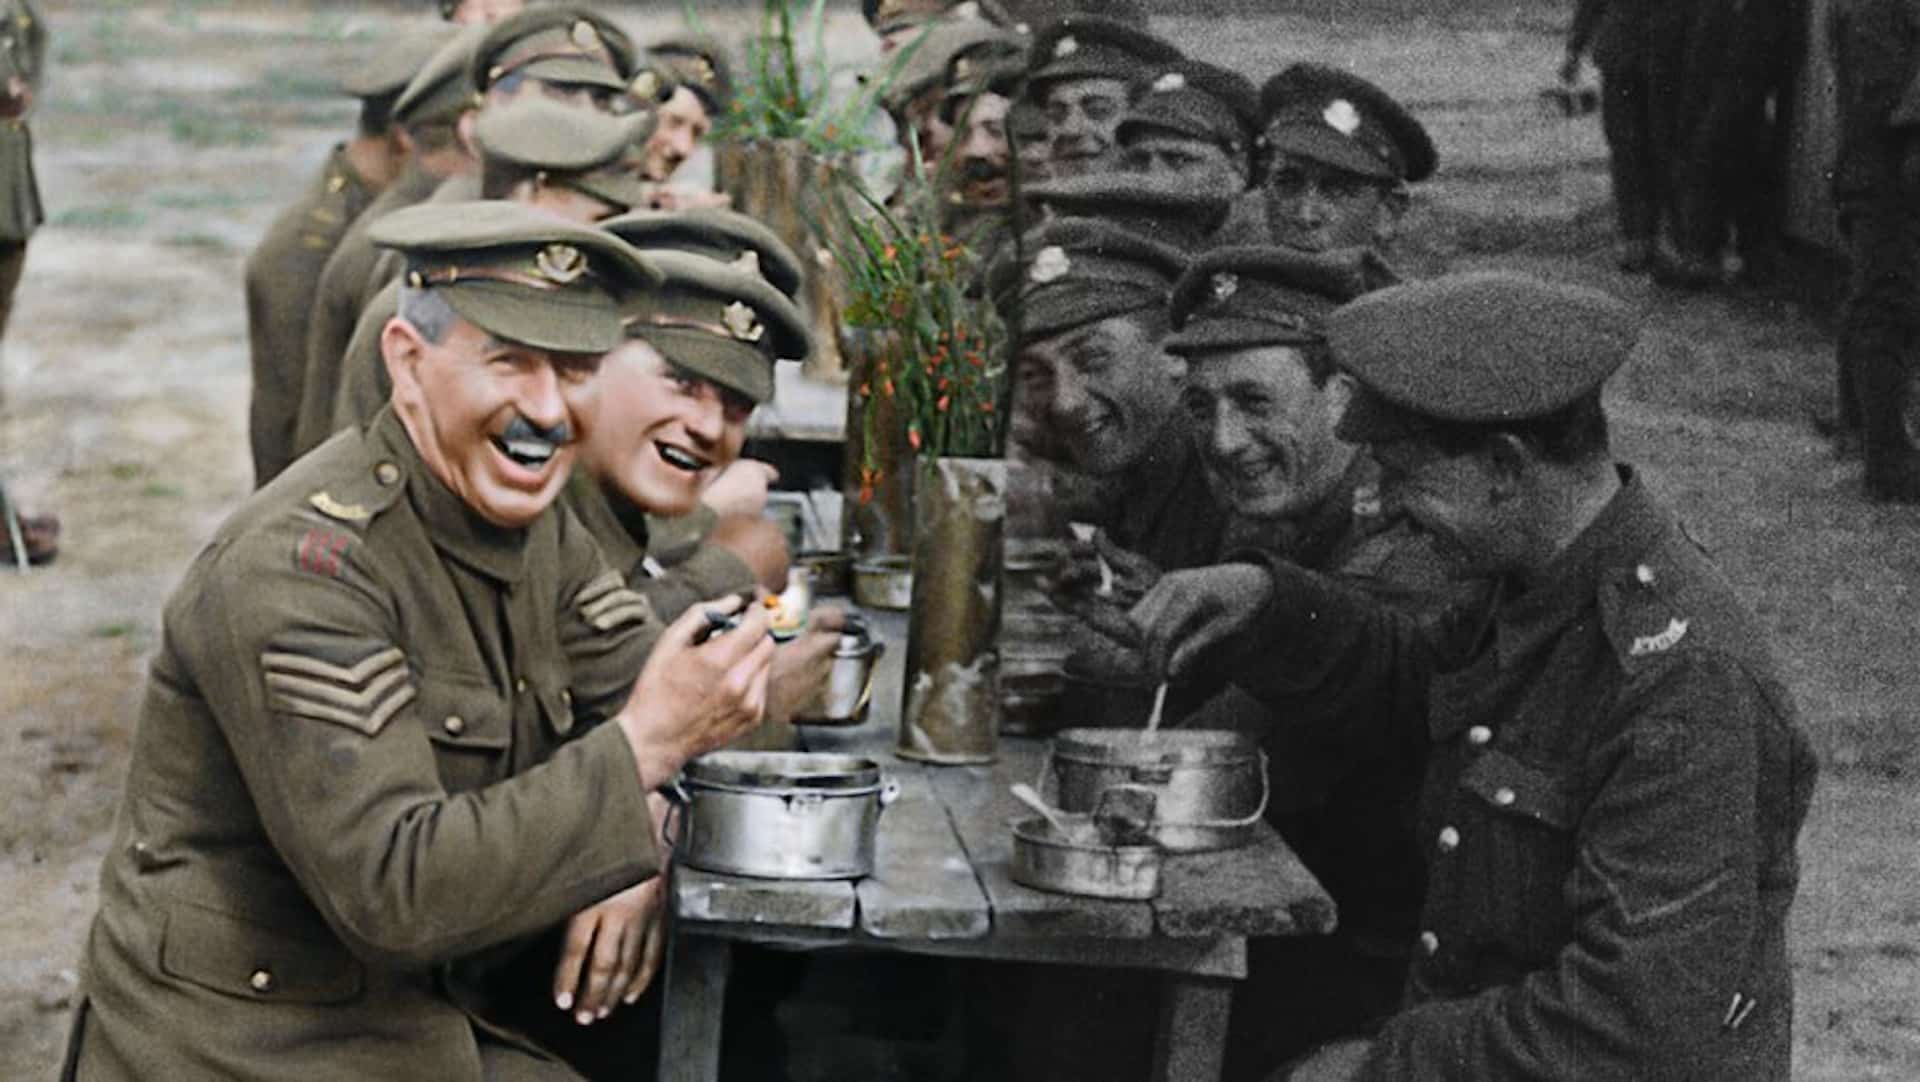 LFF 2018 – They Shall Not Grow Old: recensione del film di Peter Jackson